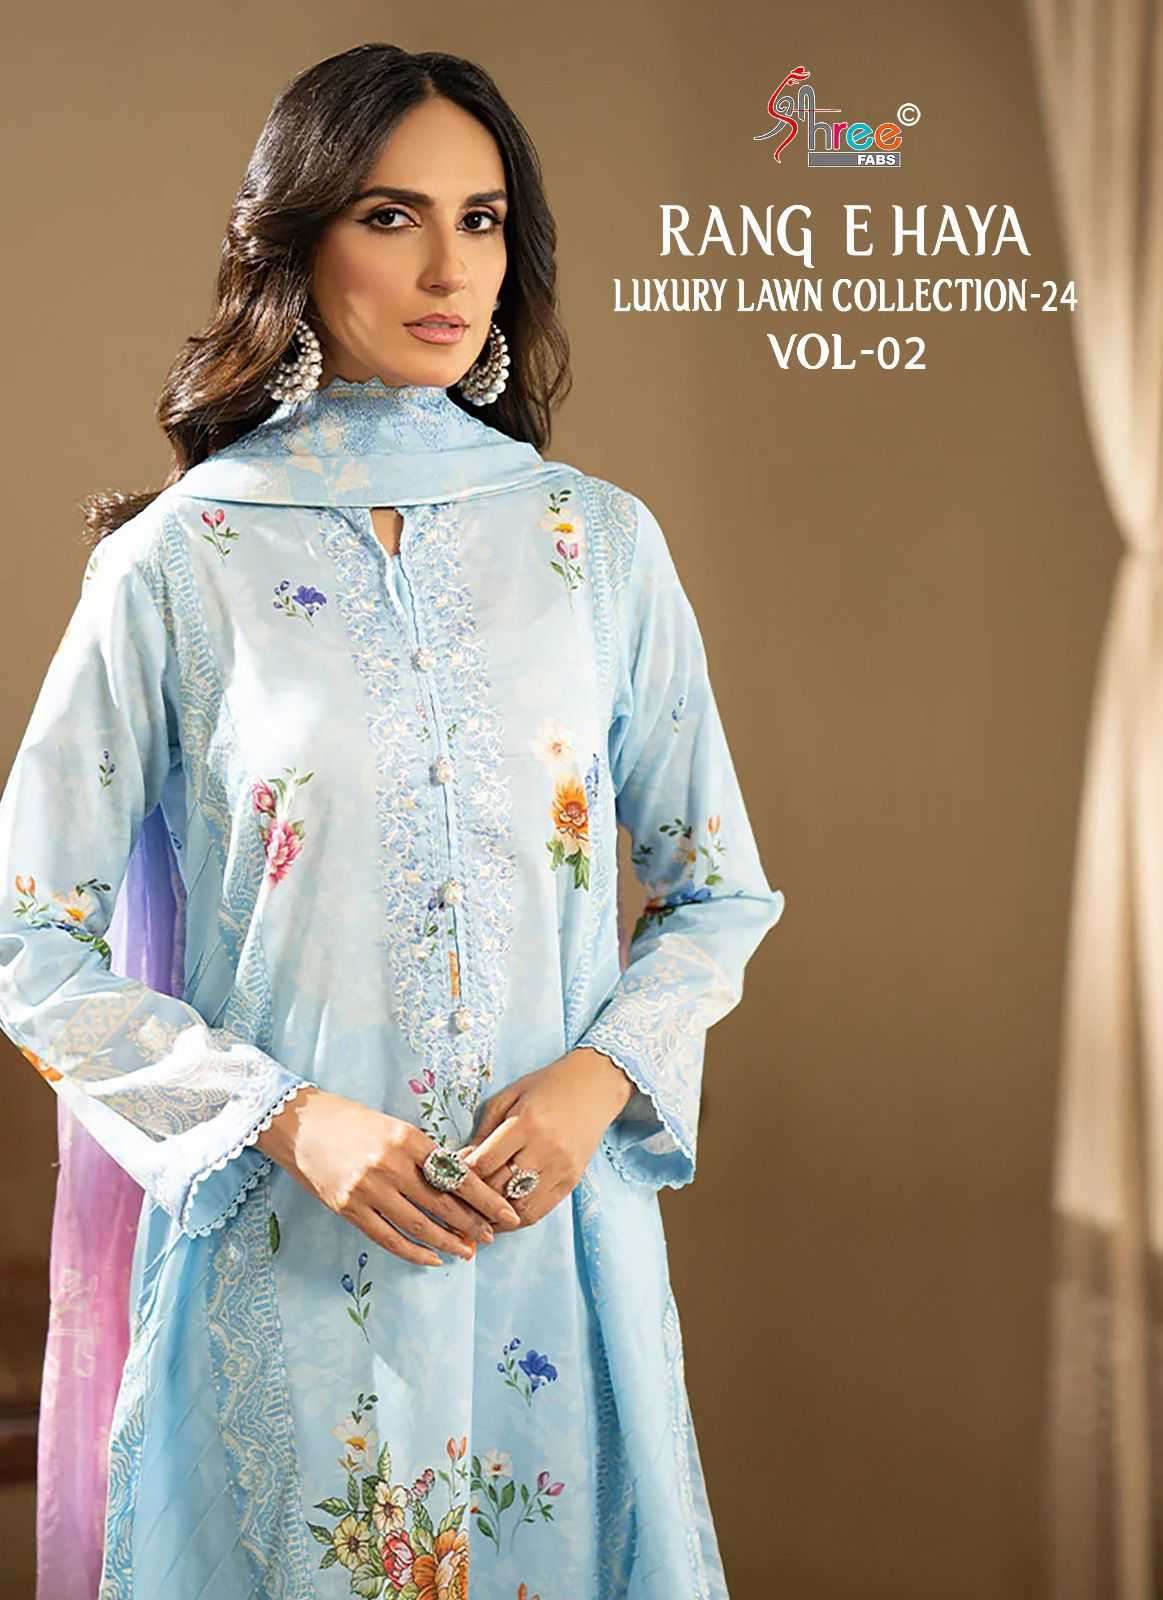 shree fabs rang e haya lux lawn collection vol 2 series 3464-3469 pure cotton suit 